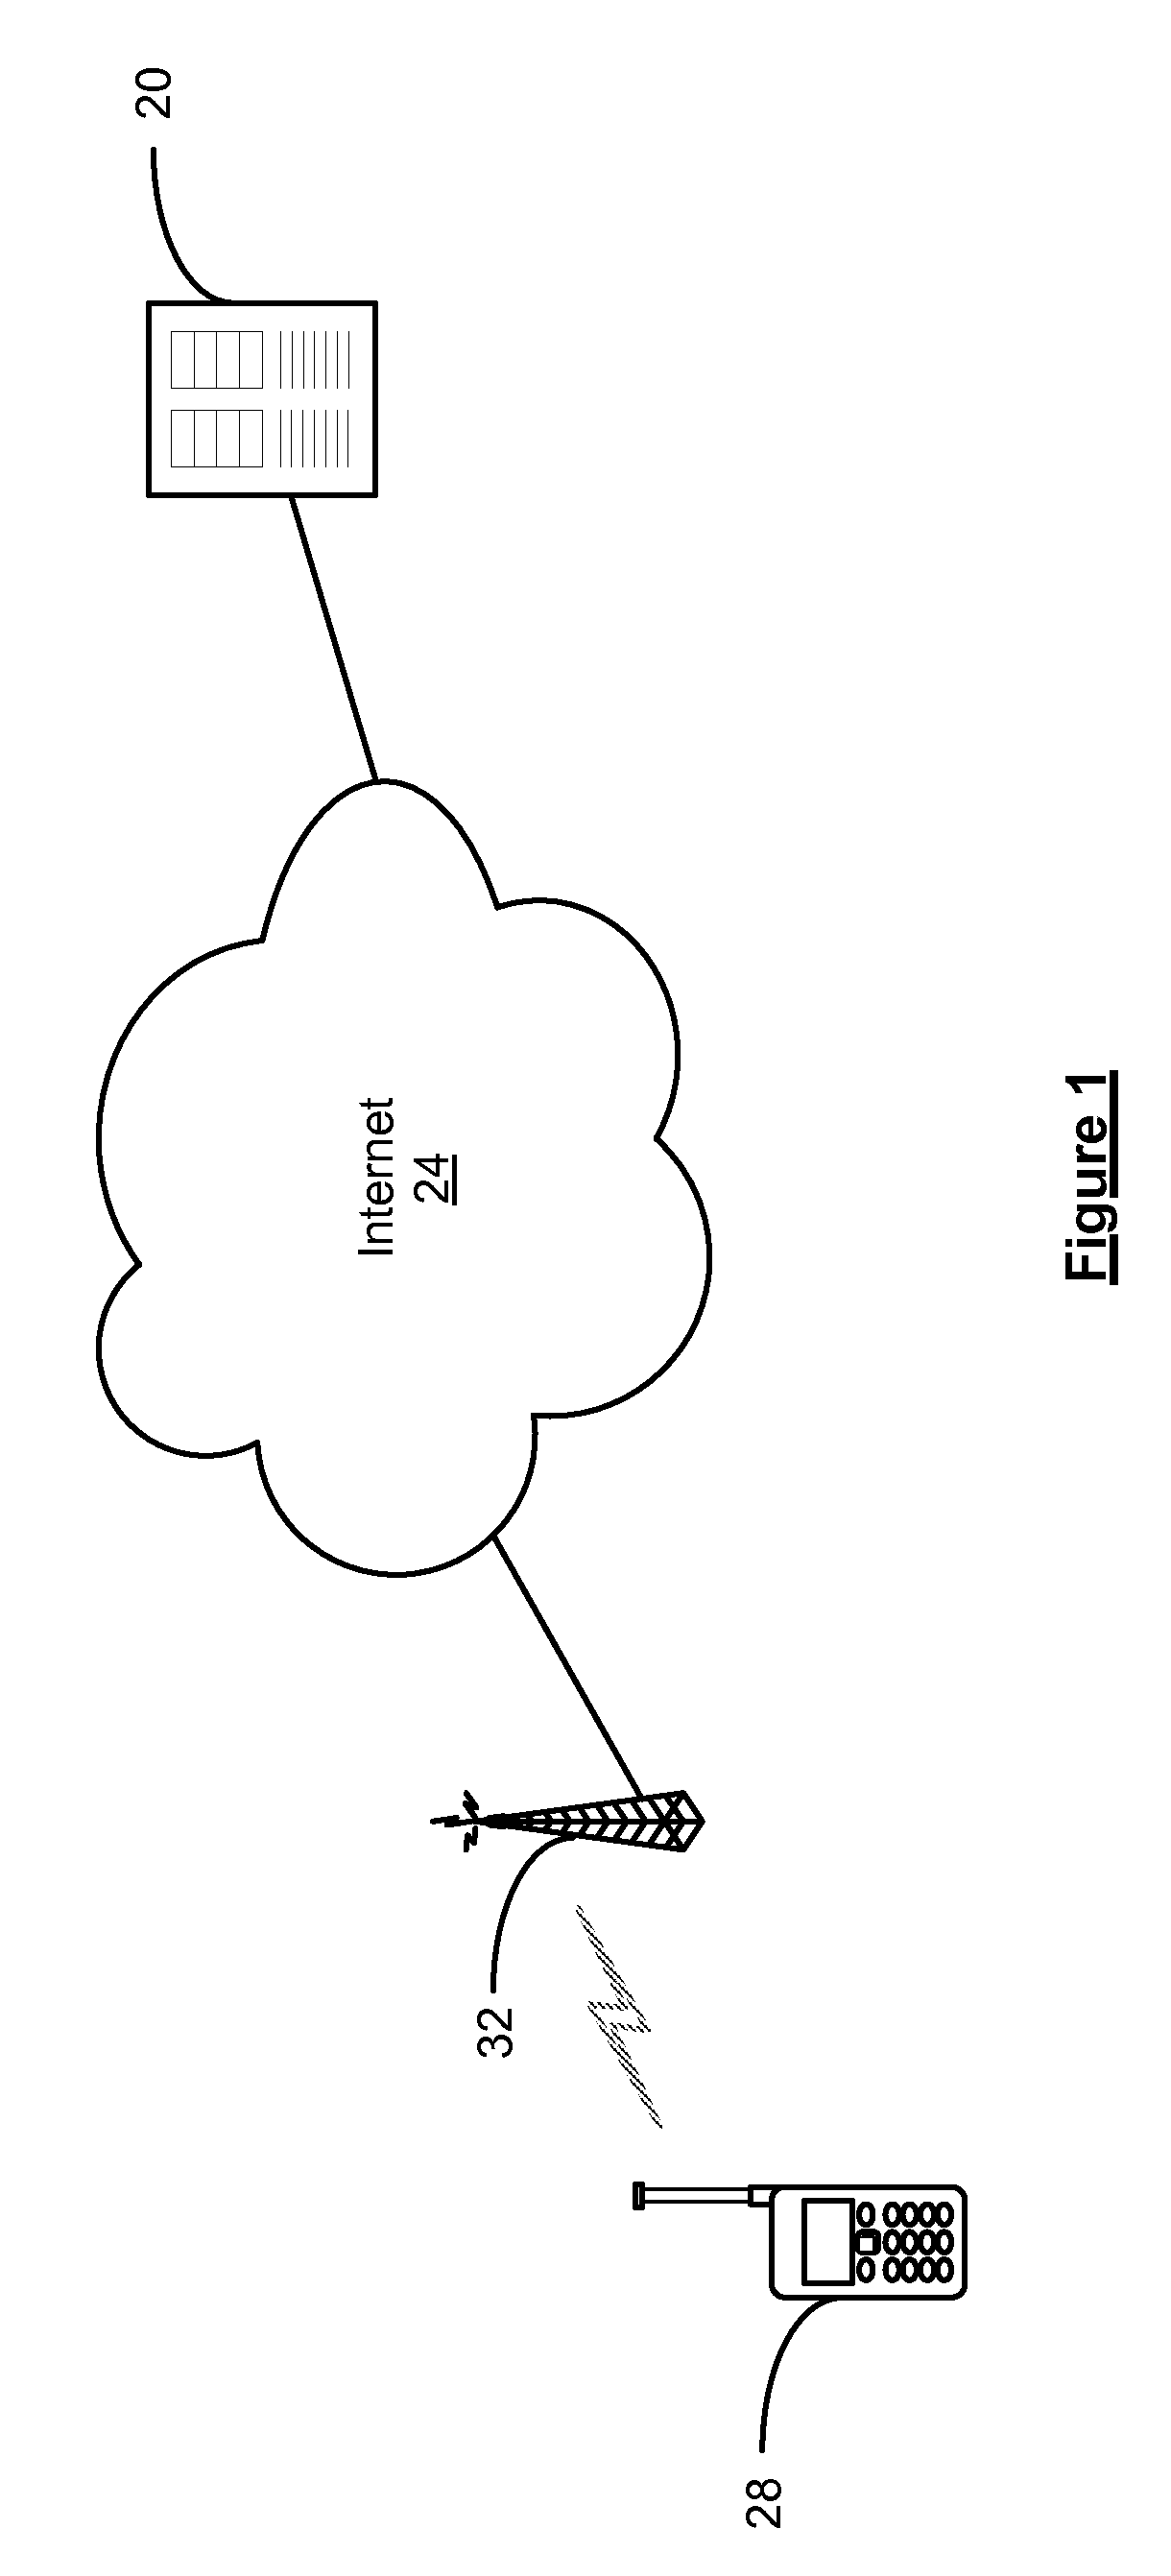 Method and system for secure communication using hash-based message authentication codes